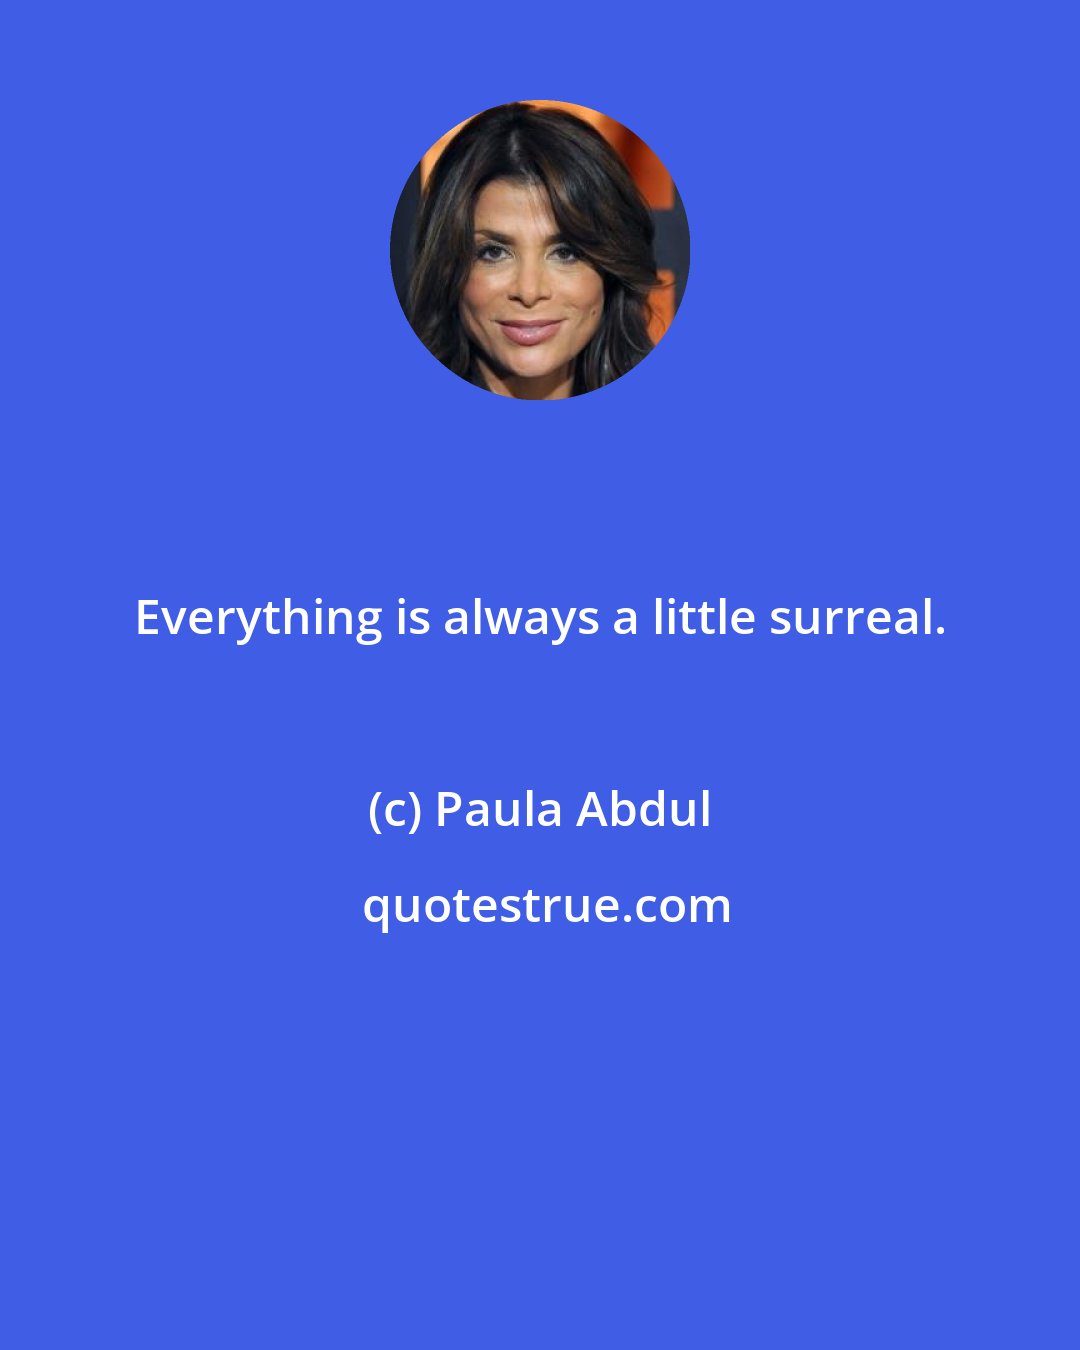 Paula Abdul: Everything is always a little surreal.